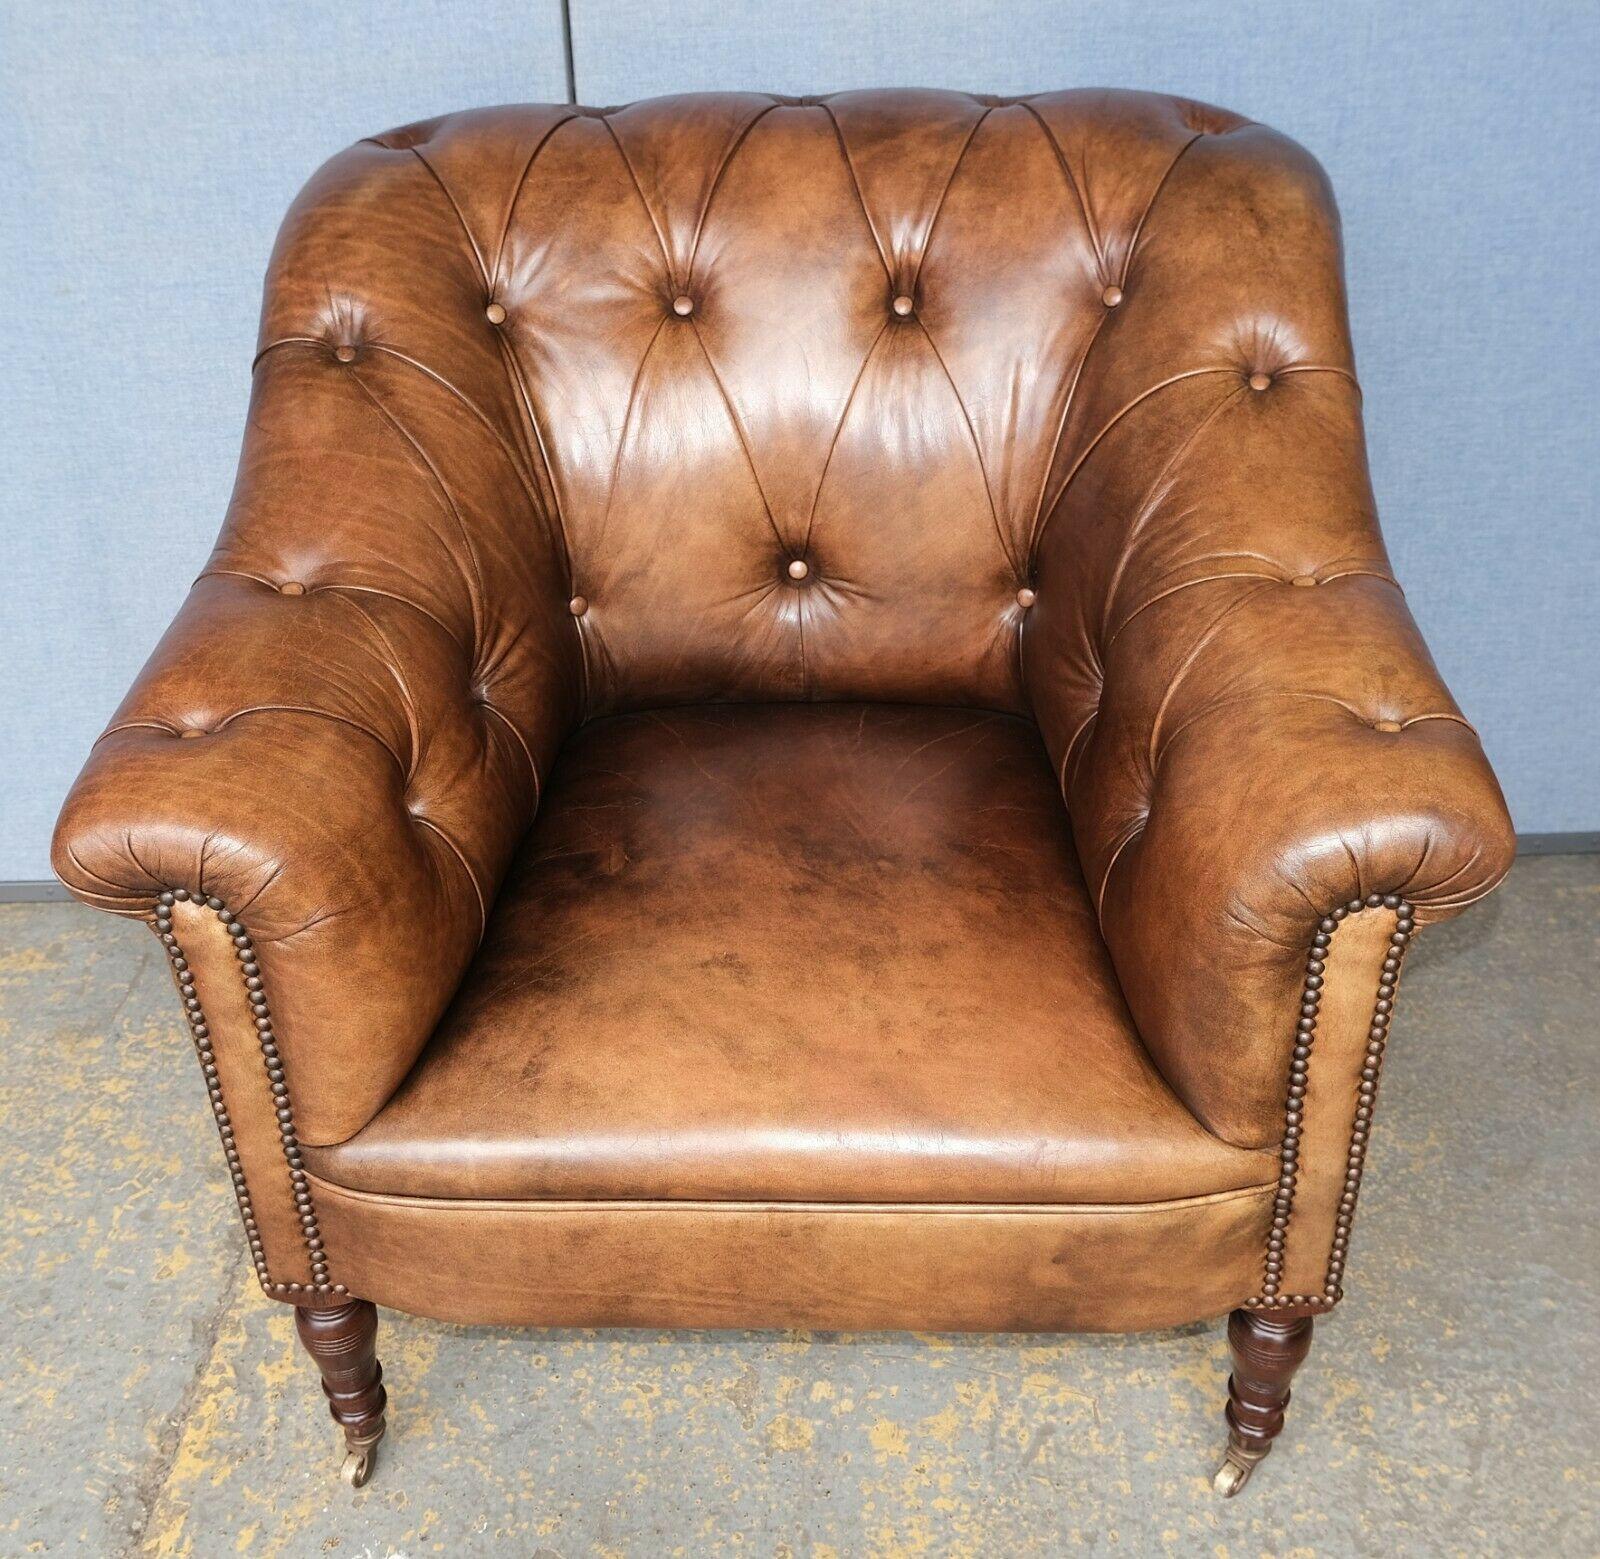 We are delighted to offer for sale this stylish George Smith Somerville collection Chesterfield Brown Leather Armchair on casters.

George Smith is synonymous with good design and well made crafted furniture. This armchair looks stunning in any